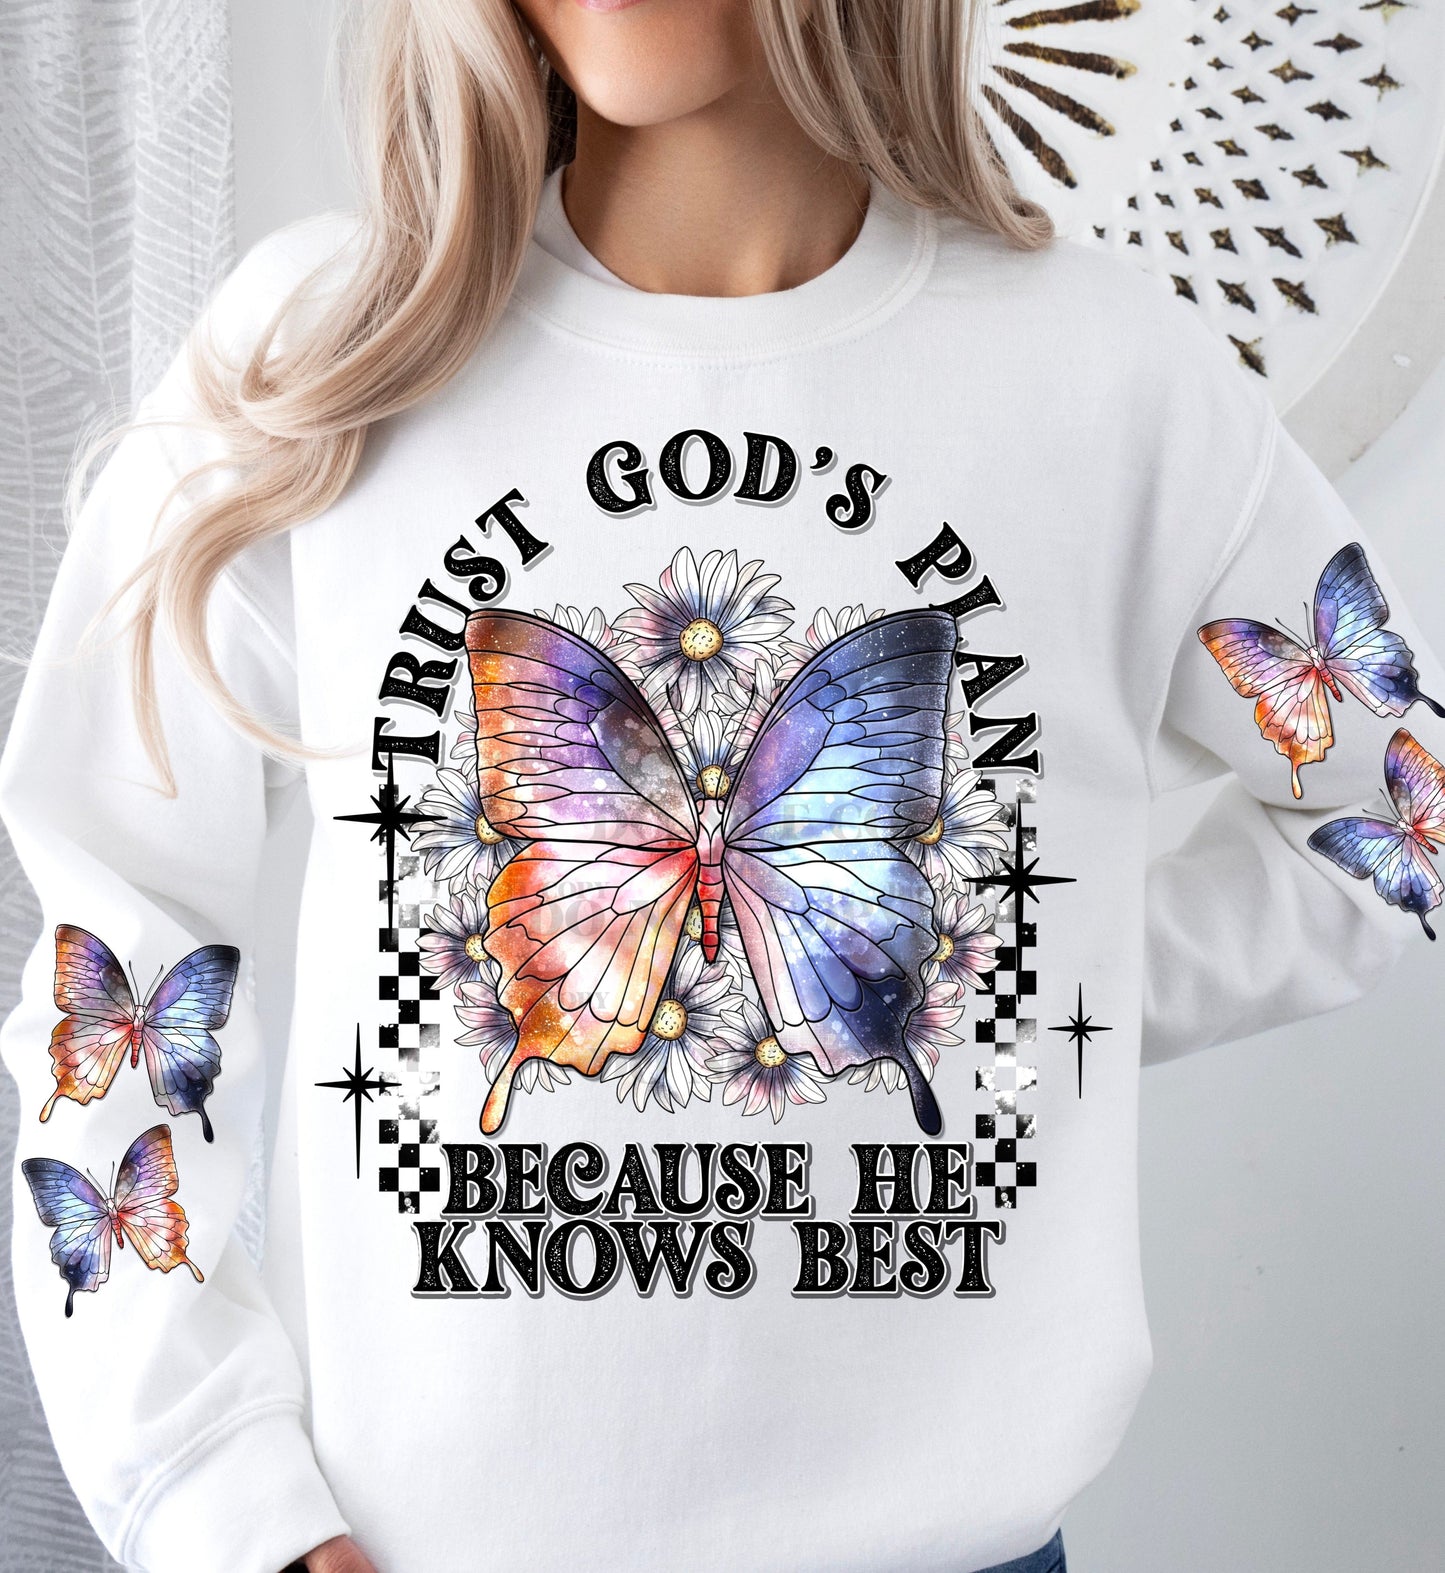 Christian Trust Gods Plan Butterfly Sweatshirt or T-Shirt with Sleeve Print - Inspirational Clothing for Men and Women